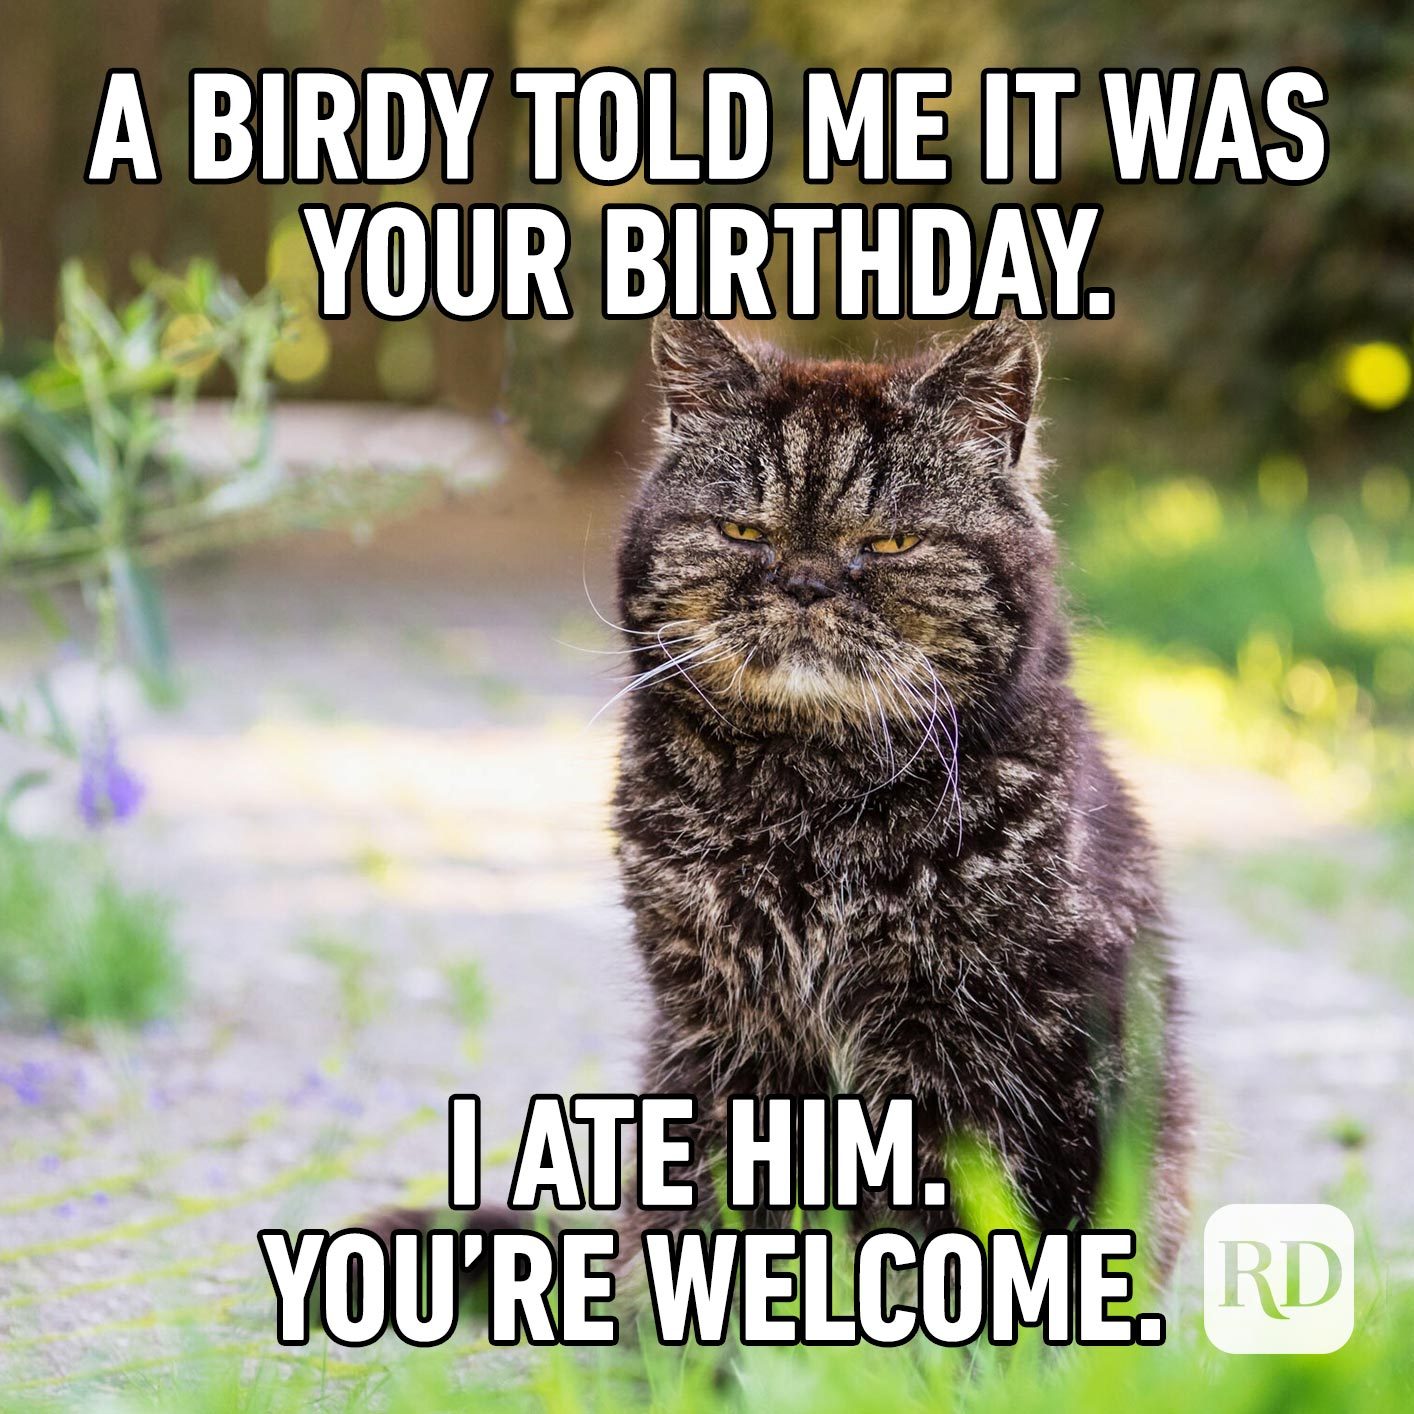 A birdy told me it was your birthday. I ate him. You're welcome.